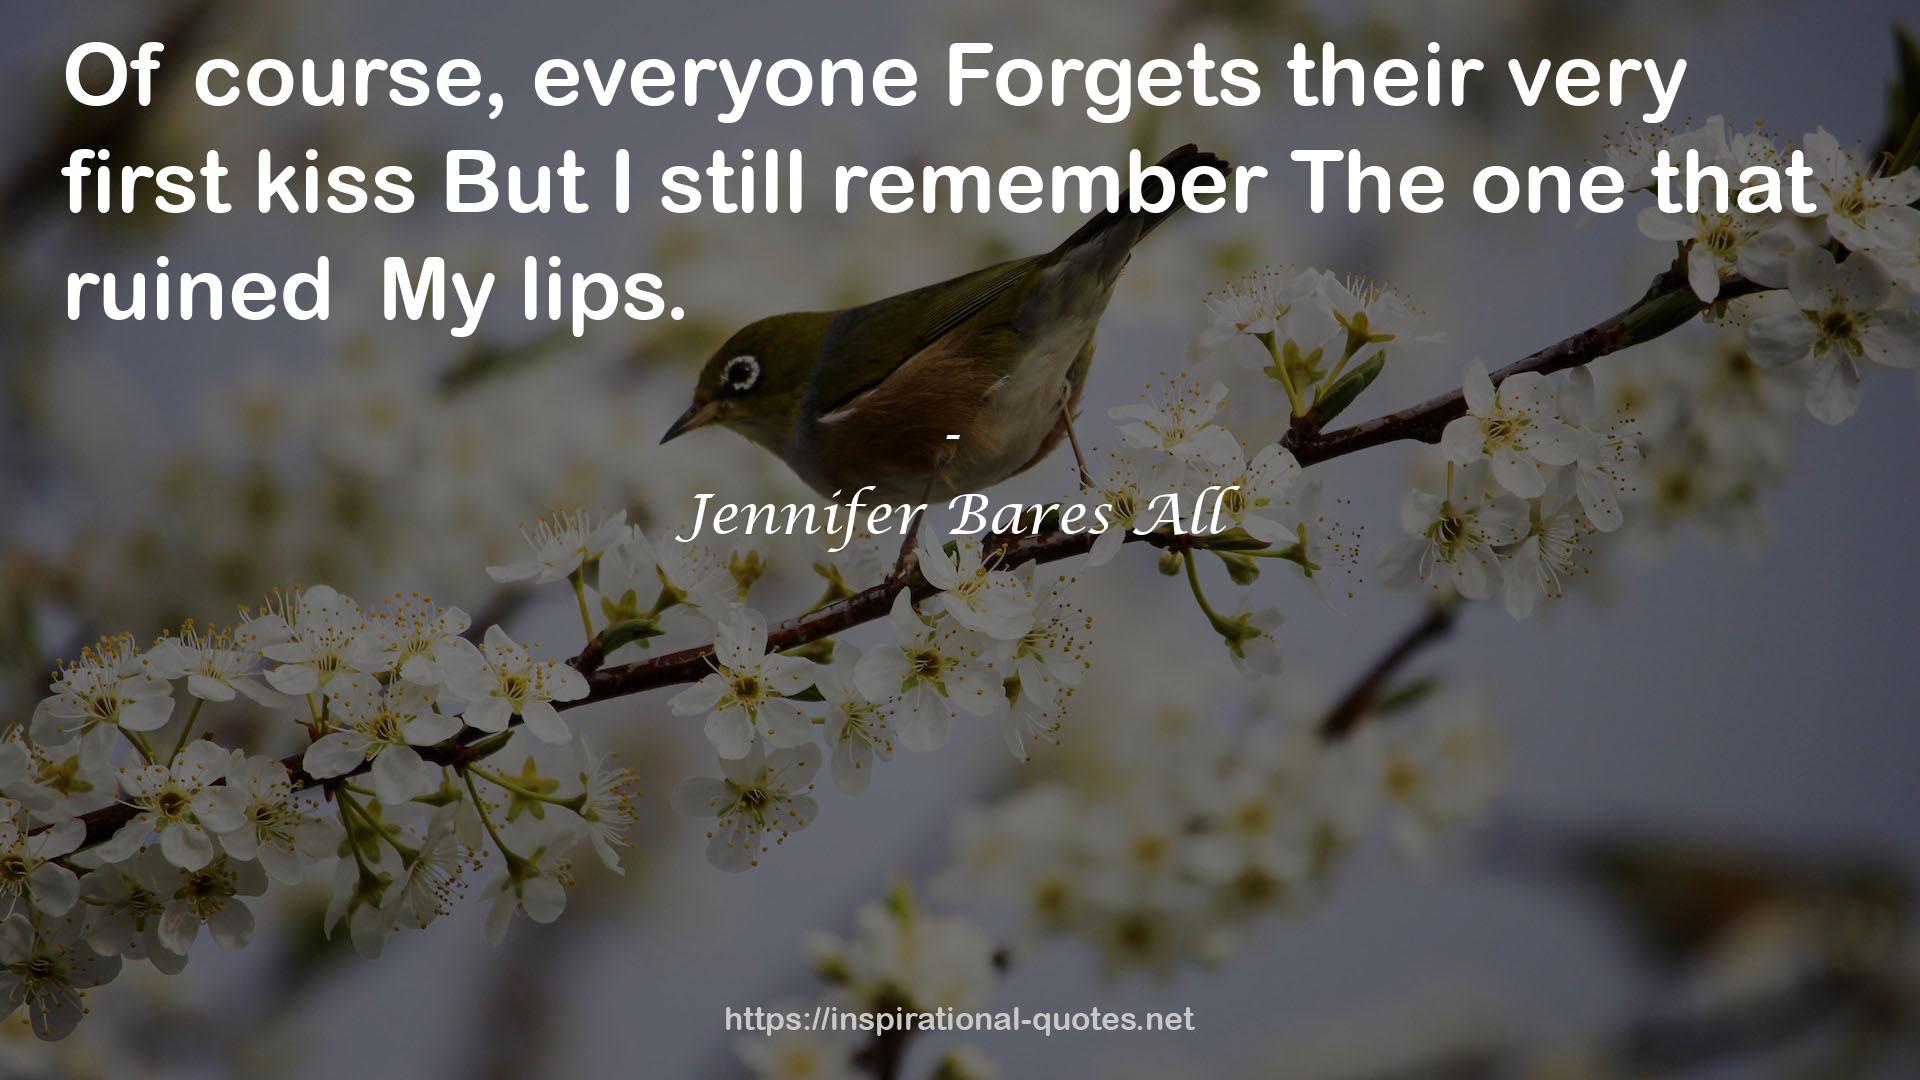 Jennifer Bares All QUOTES